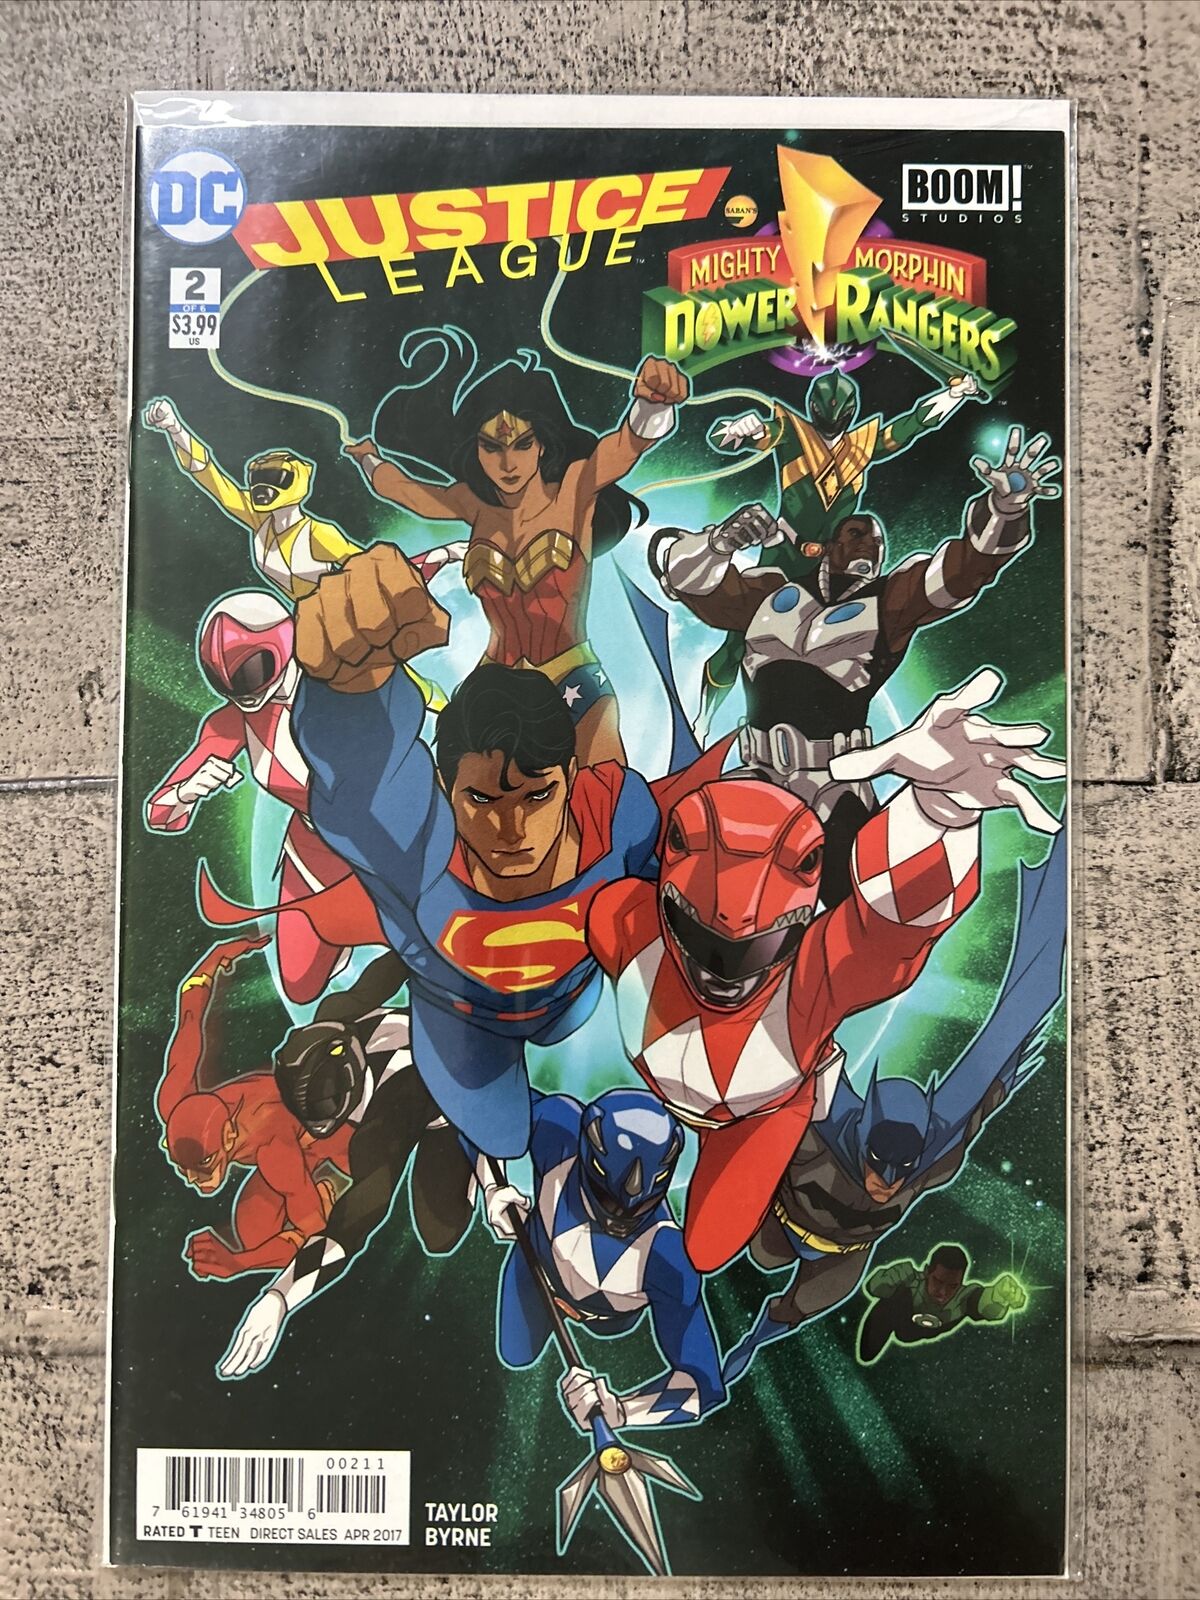 Justice League / Mighty Morphin Power Rangers #2 - Apr 2017 -